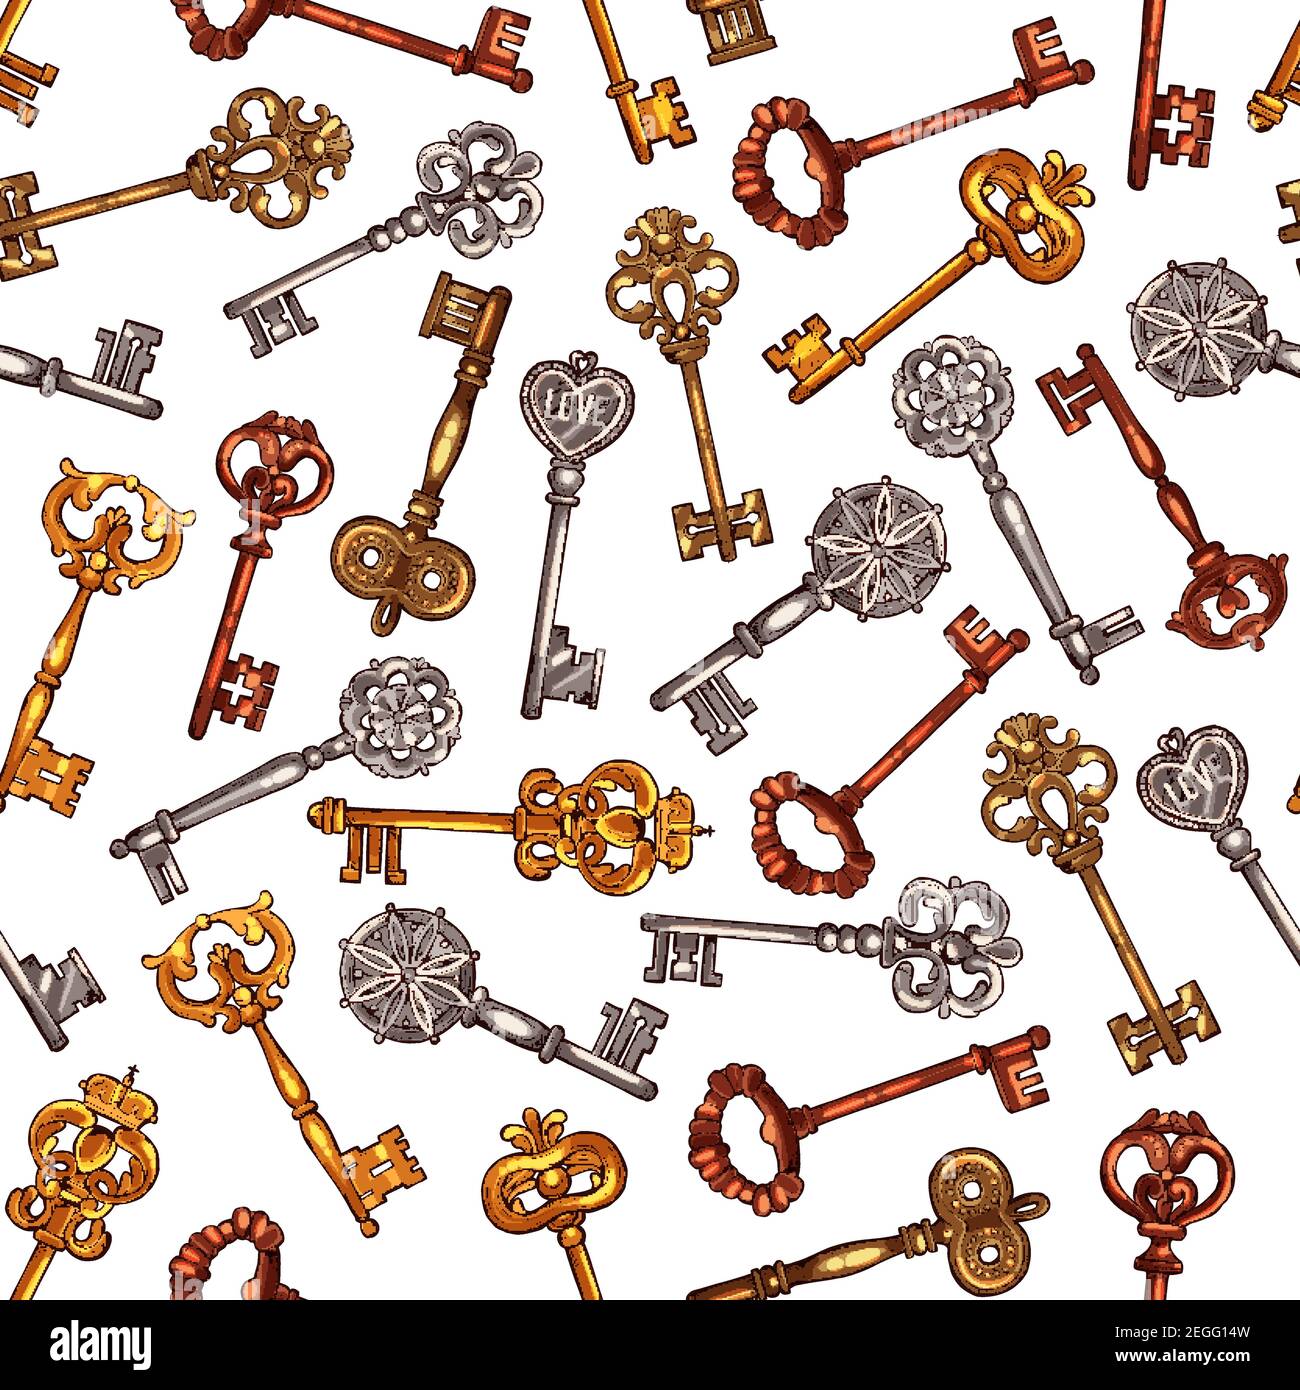 Abstract Seamless Background With Vintage Keys Stock Illustration